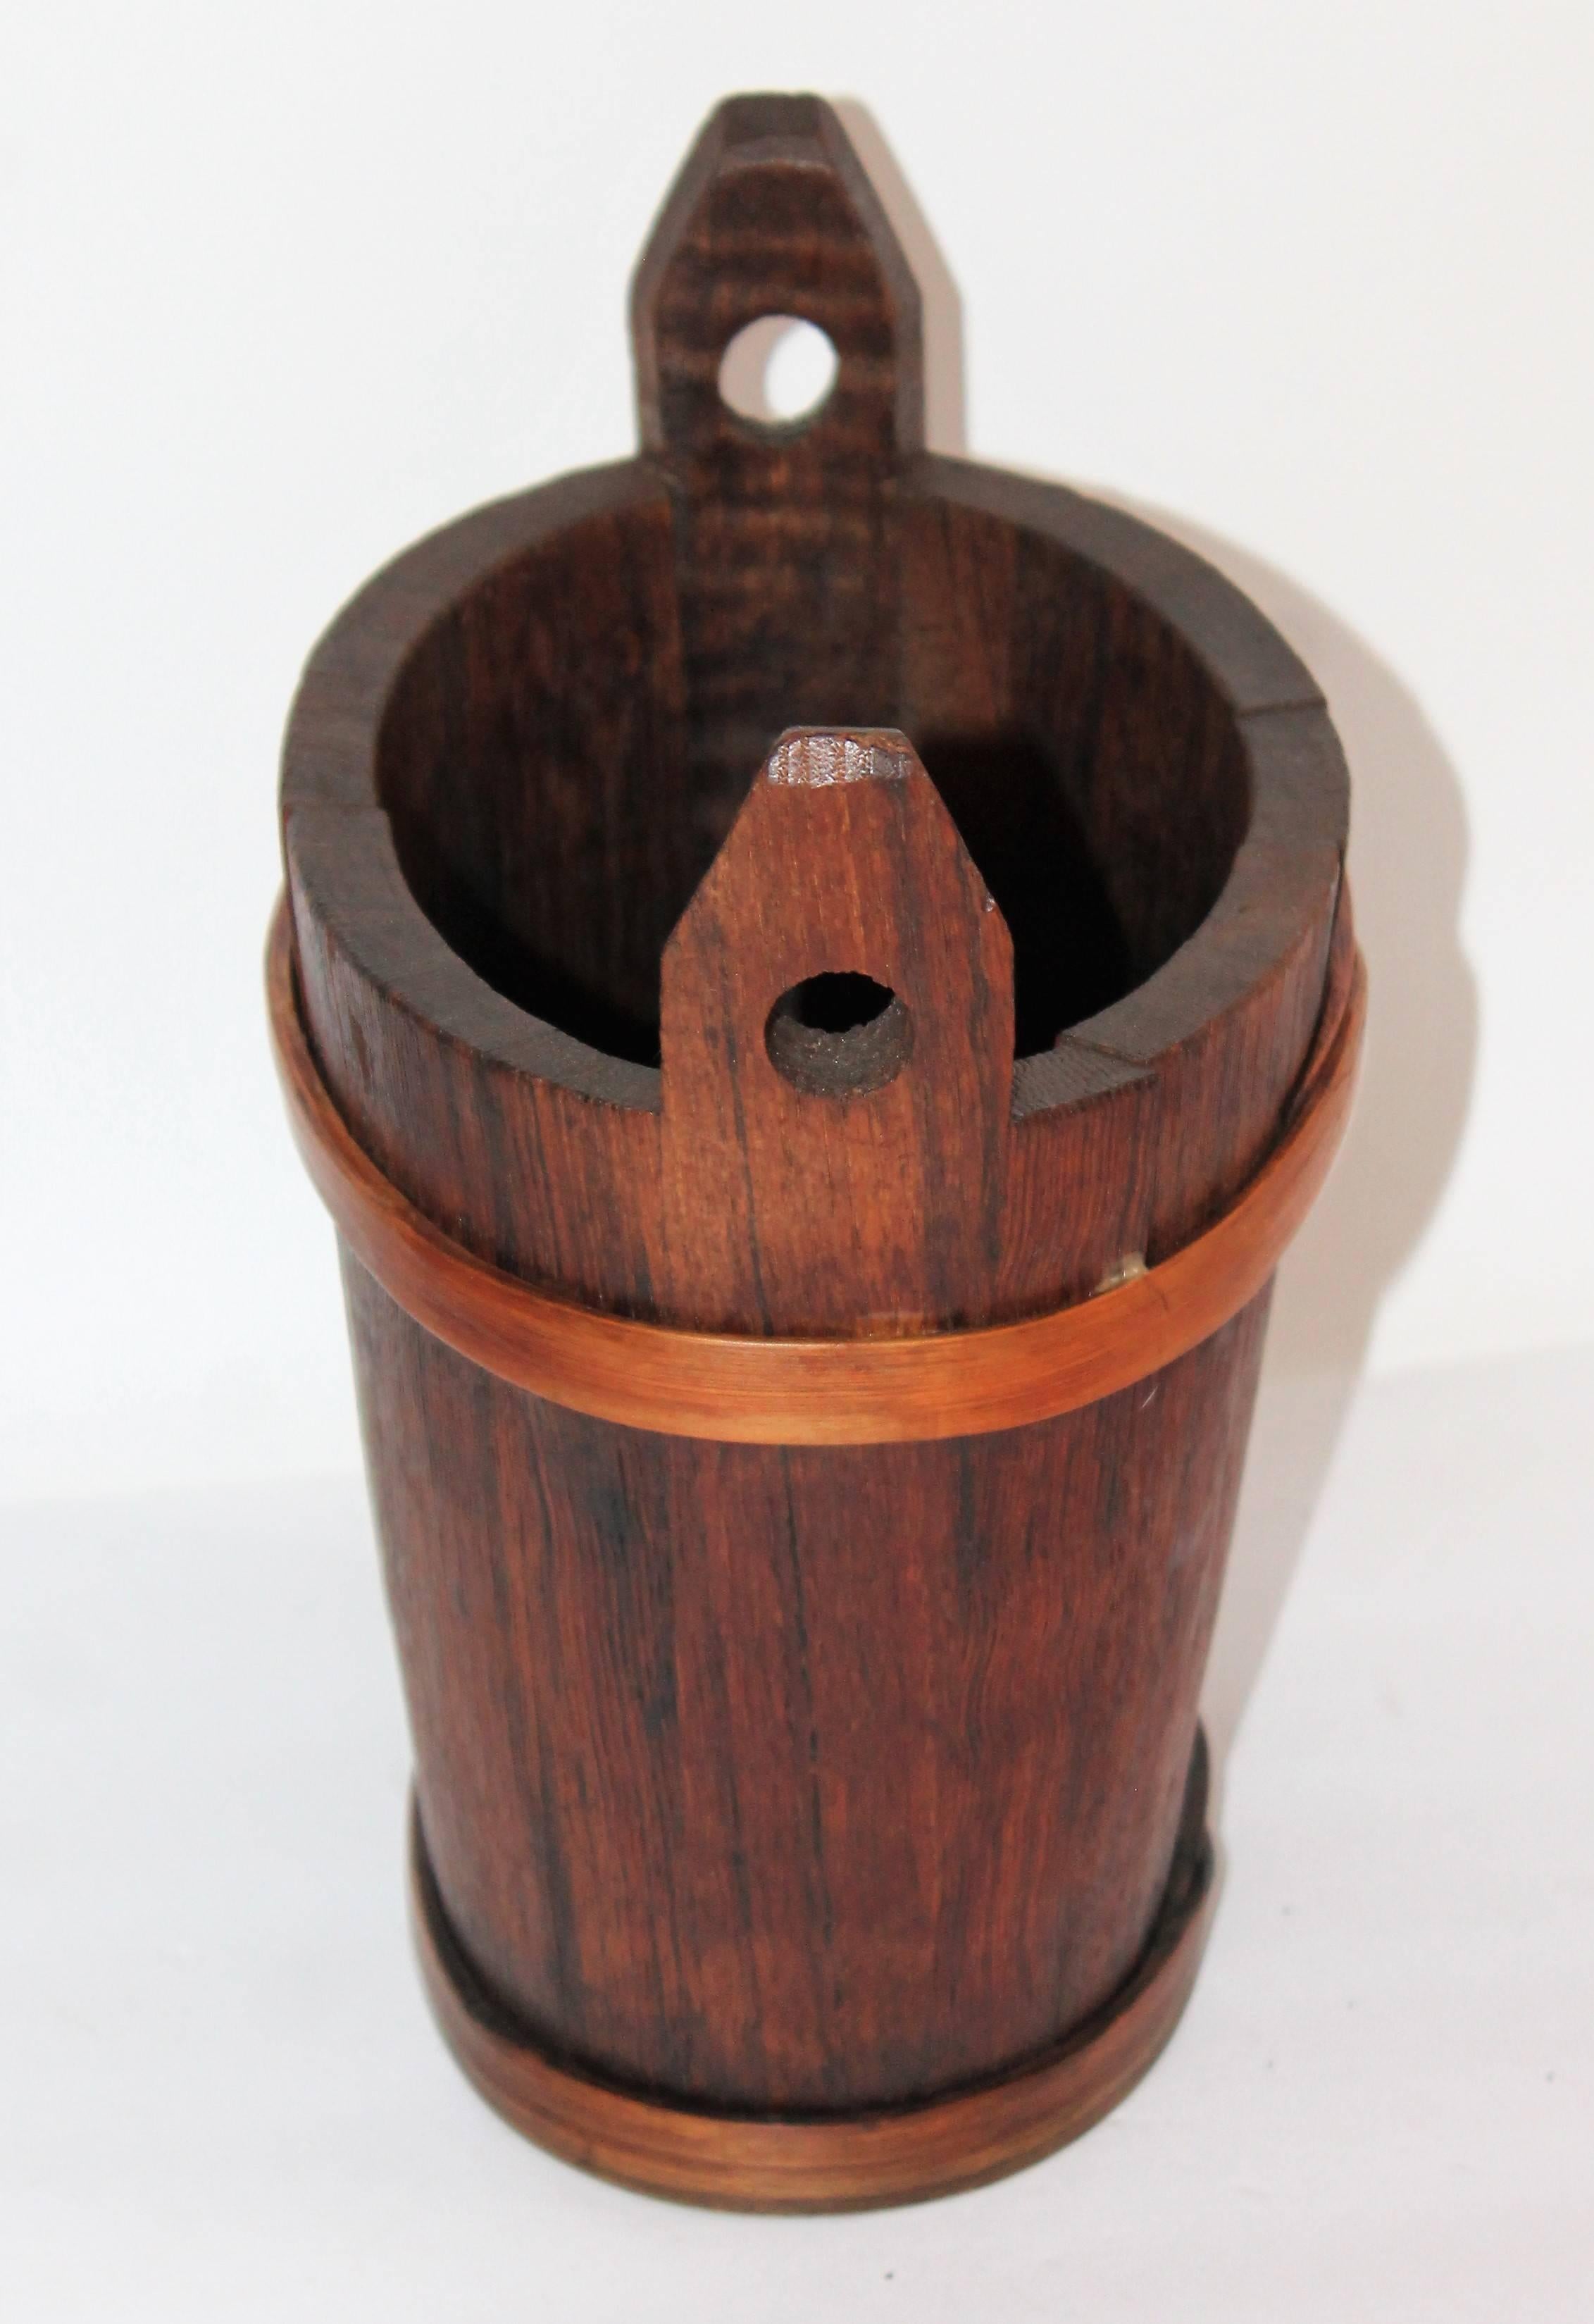 This fantastic piggin is all hand-carved and is in a Shaker style format. The double handled bucket has hand-carved handles and handmade wraps. The condition is very tight and sturdy.